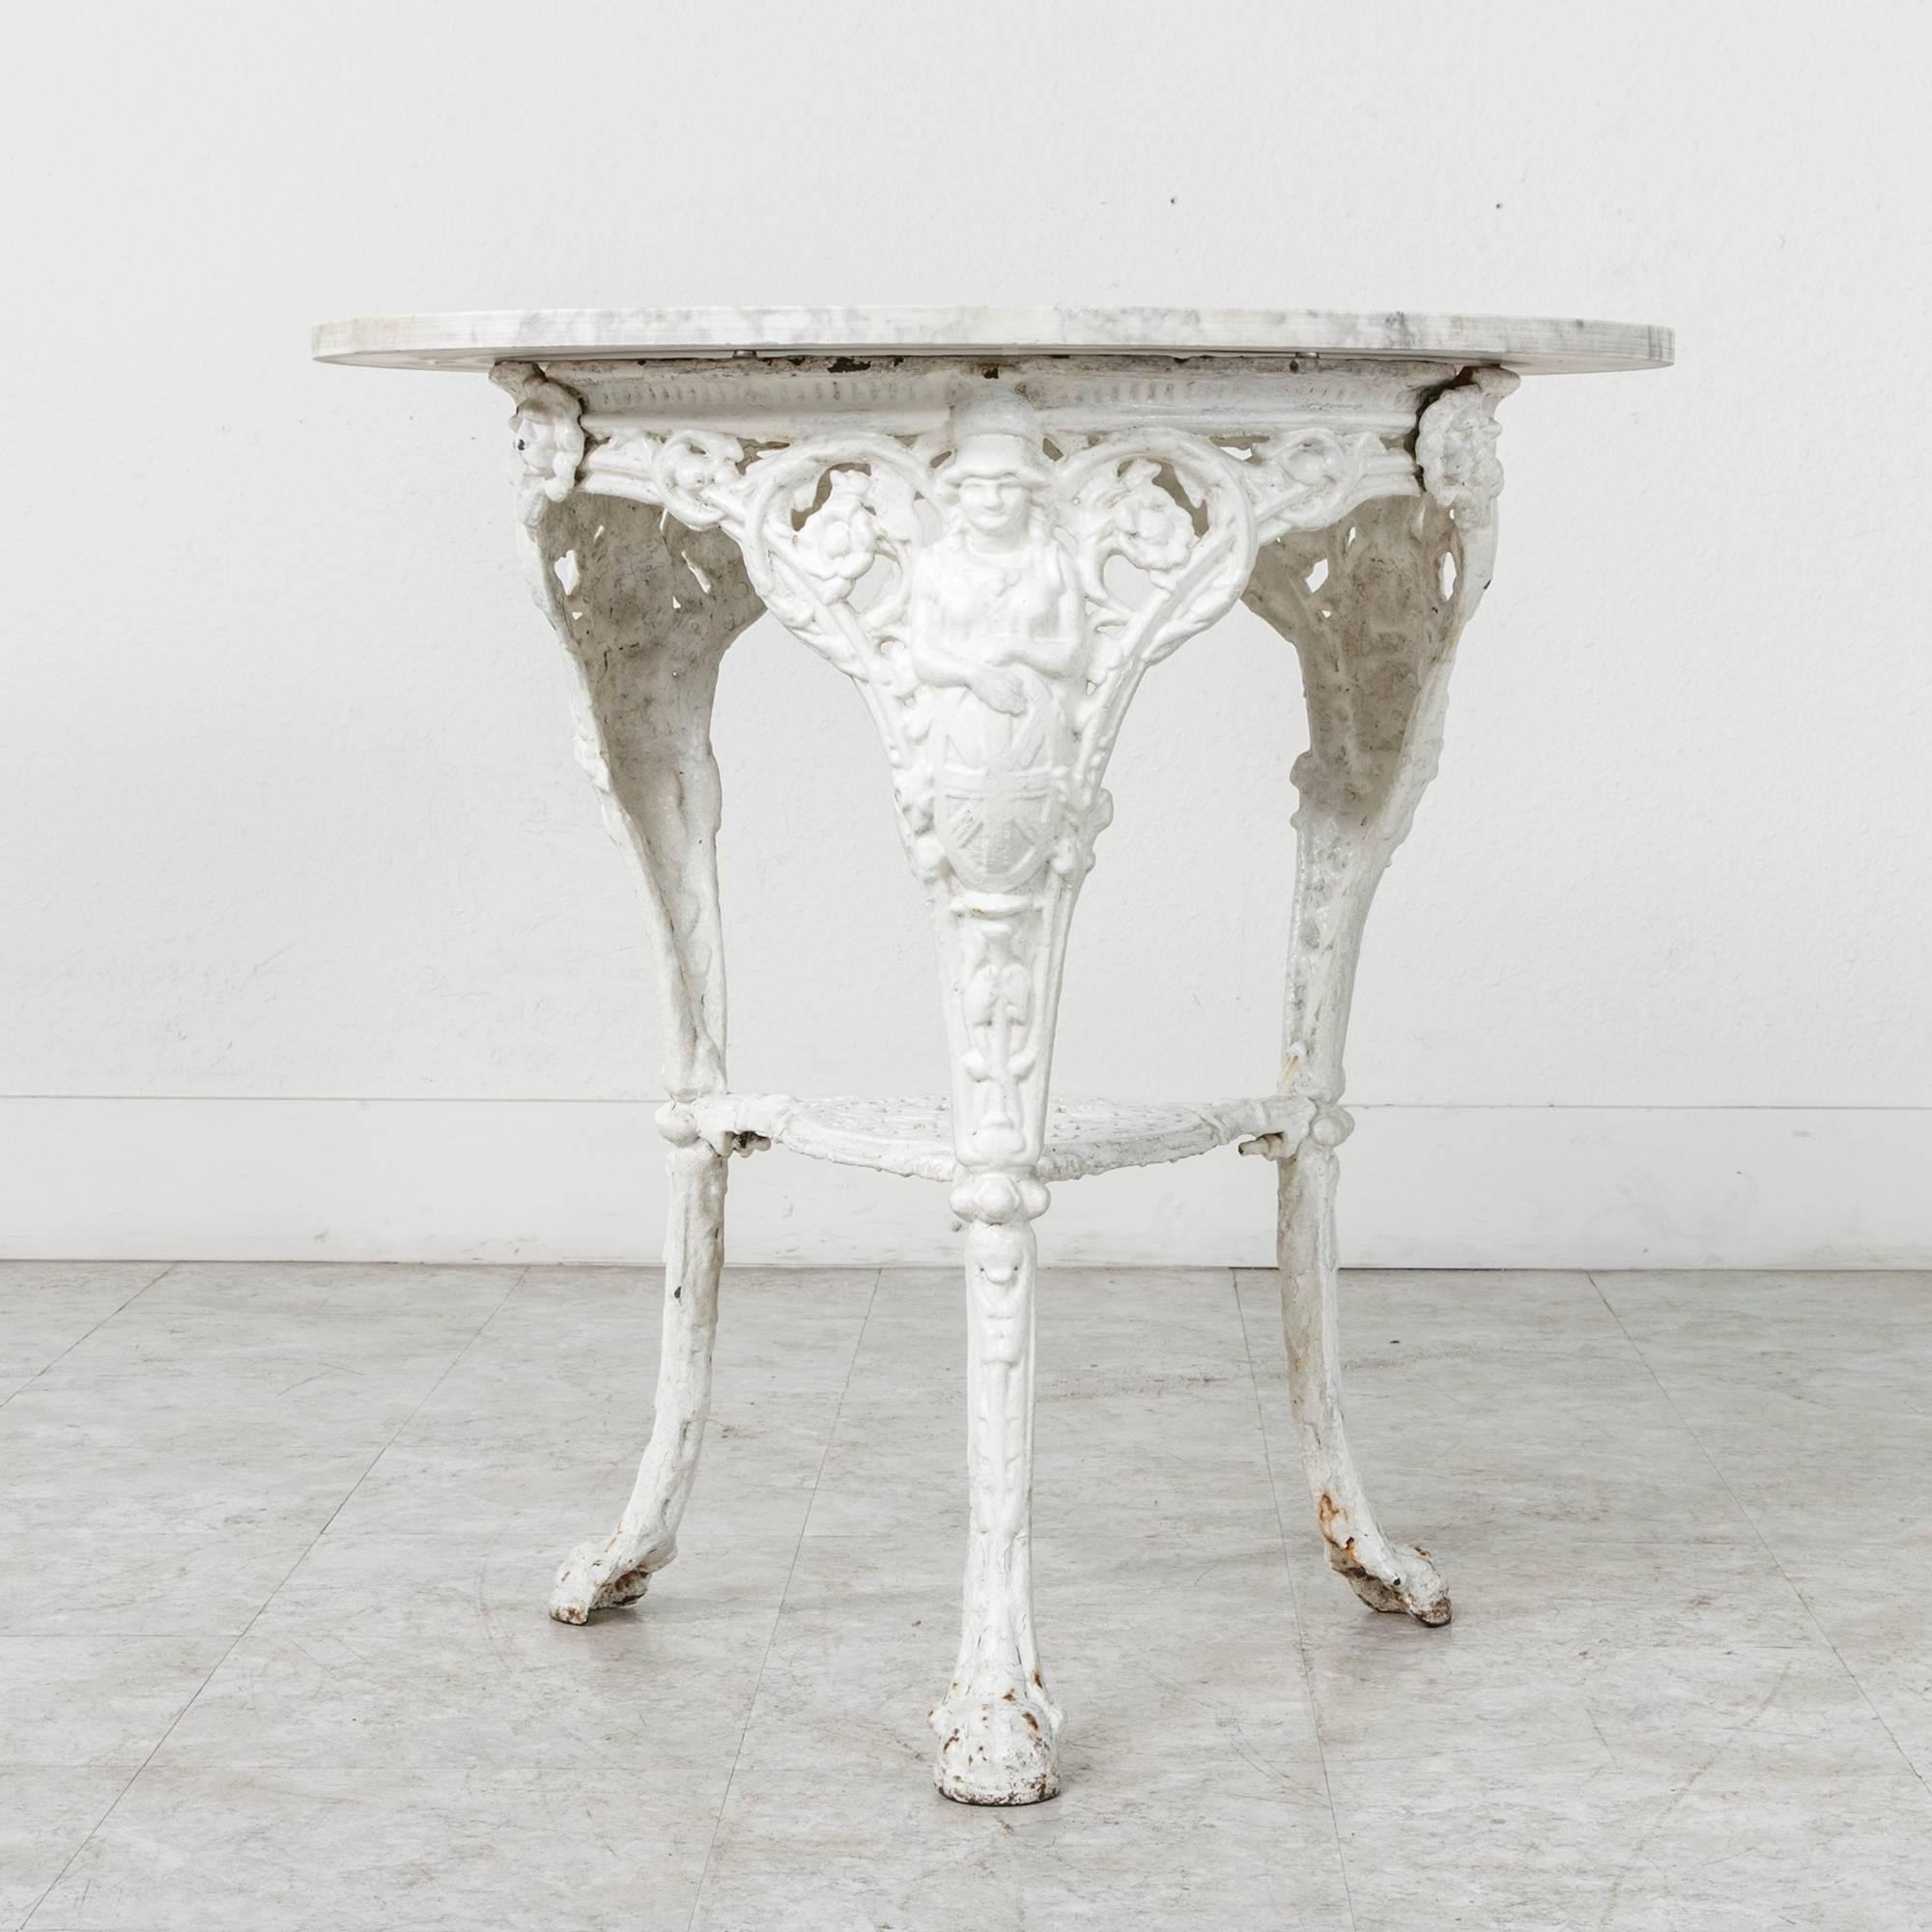 French 19th Century English Iron Pub Table Bistro Table Garden Table with Marble Top